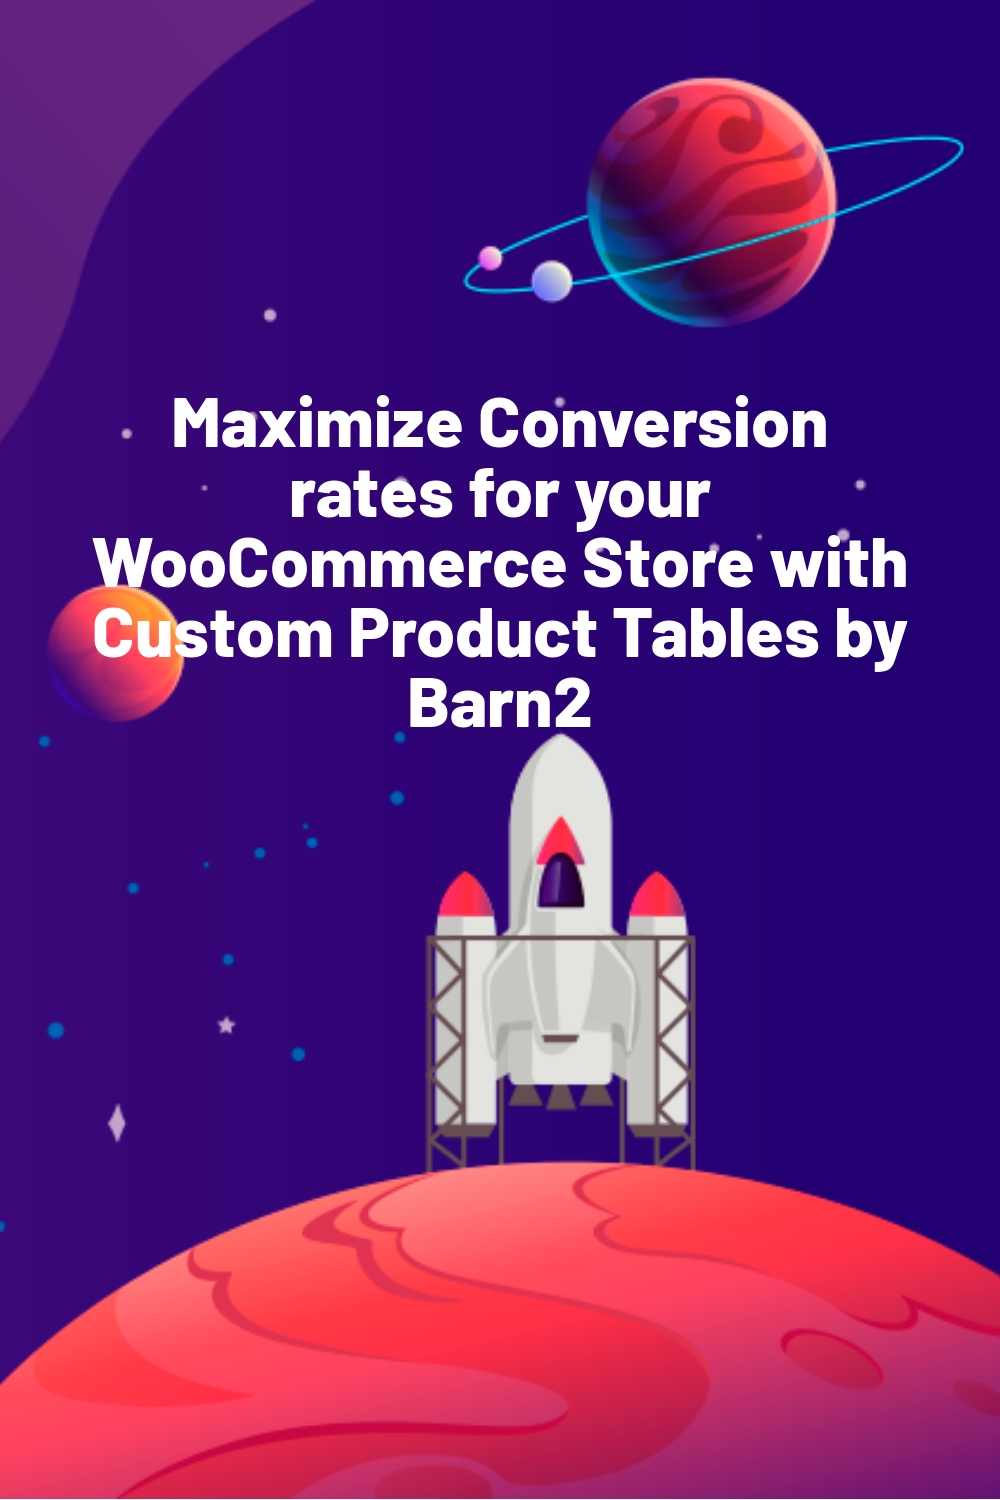 Maximize Conversion rates for your WooCommerce Store with Custom Product Tables by Barn2